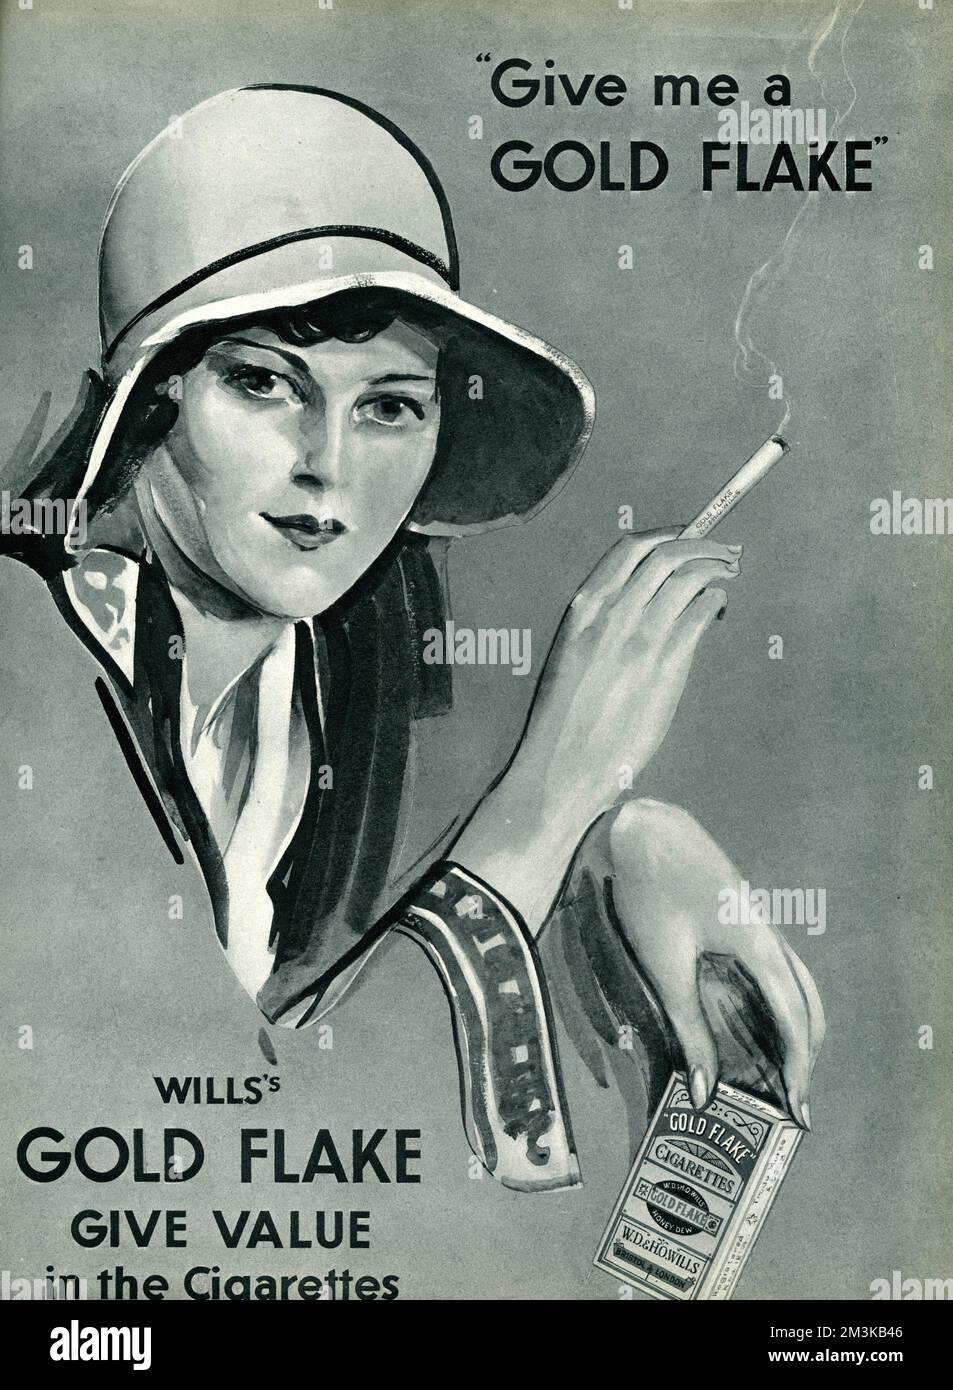 Advertisement for Gold Flake Cigarettes: Wills's Gold Flake give value in the Cigarettes,     Date: 1930 Stock Photo